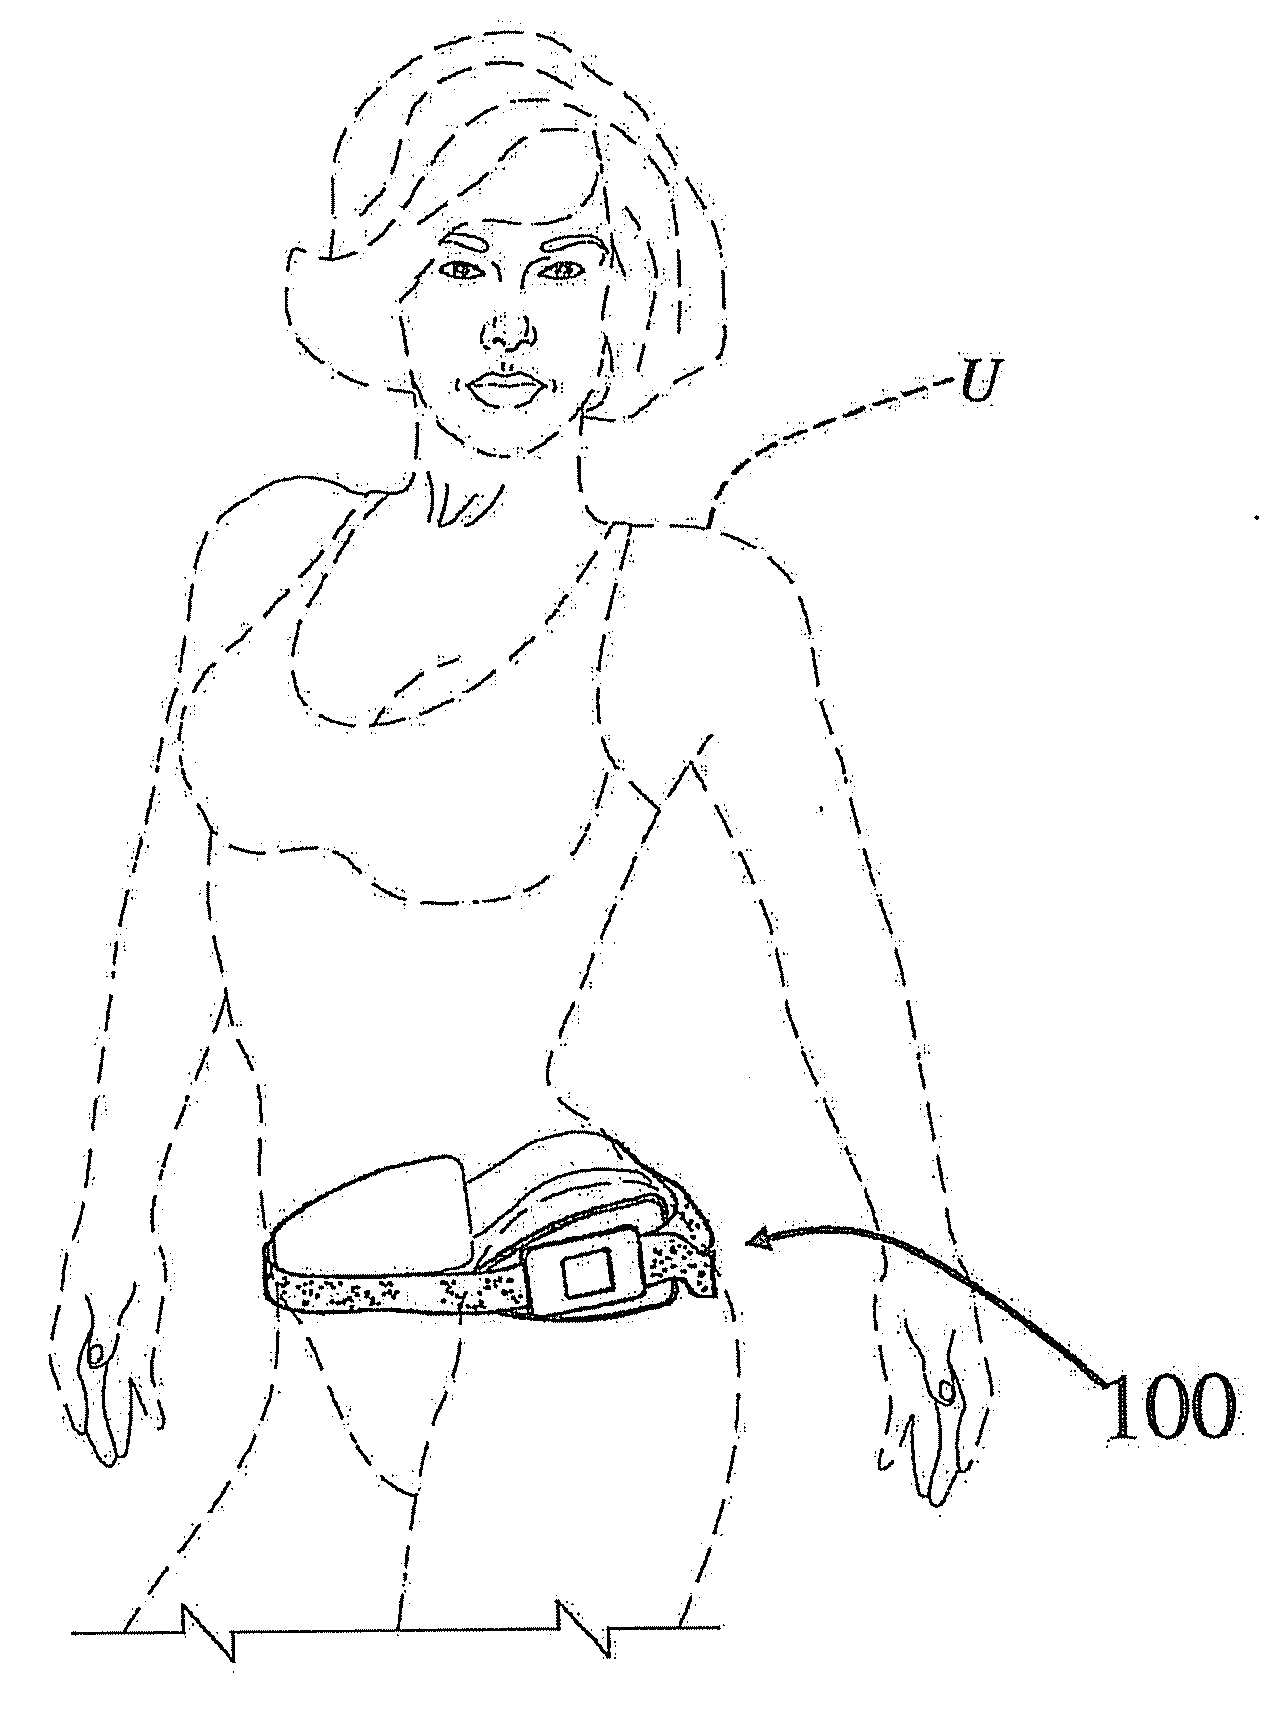 Method and Apparatus to Relieve Menstrual Pain